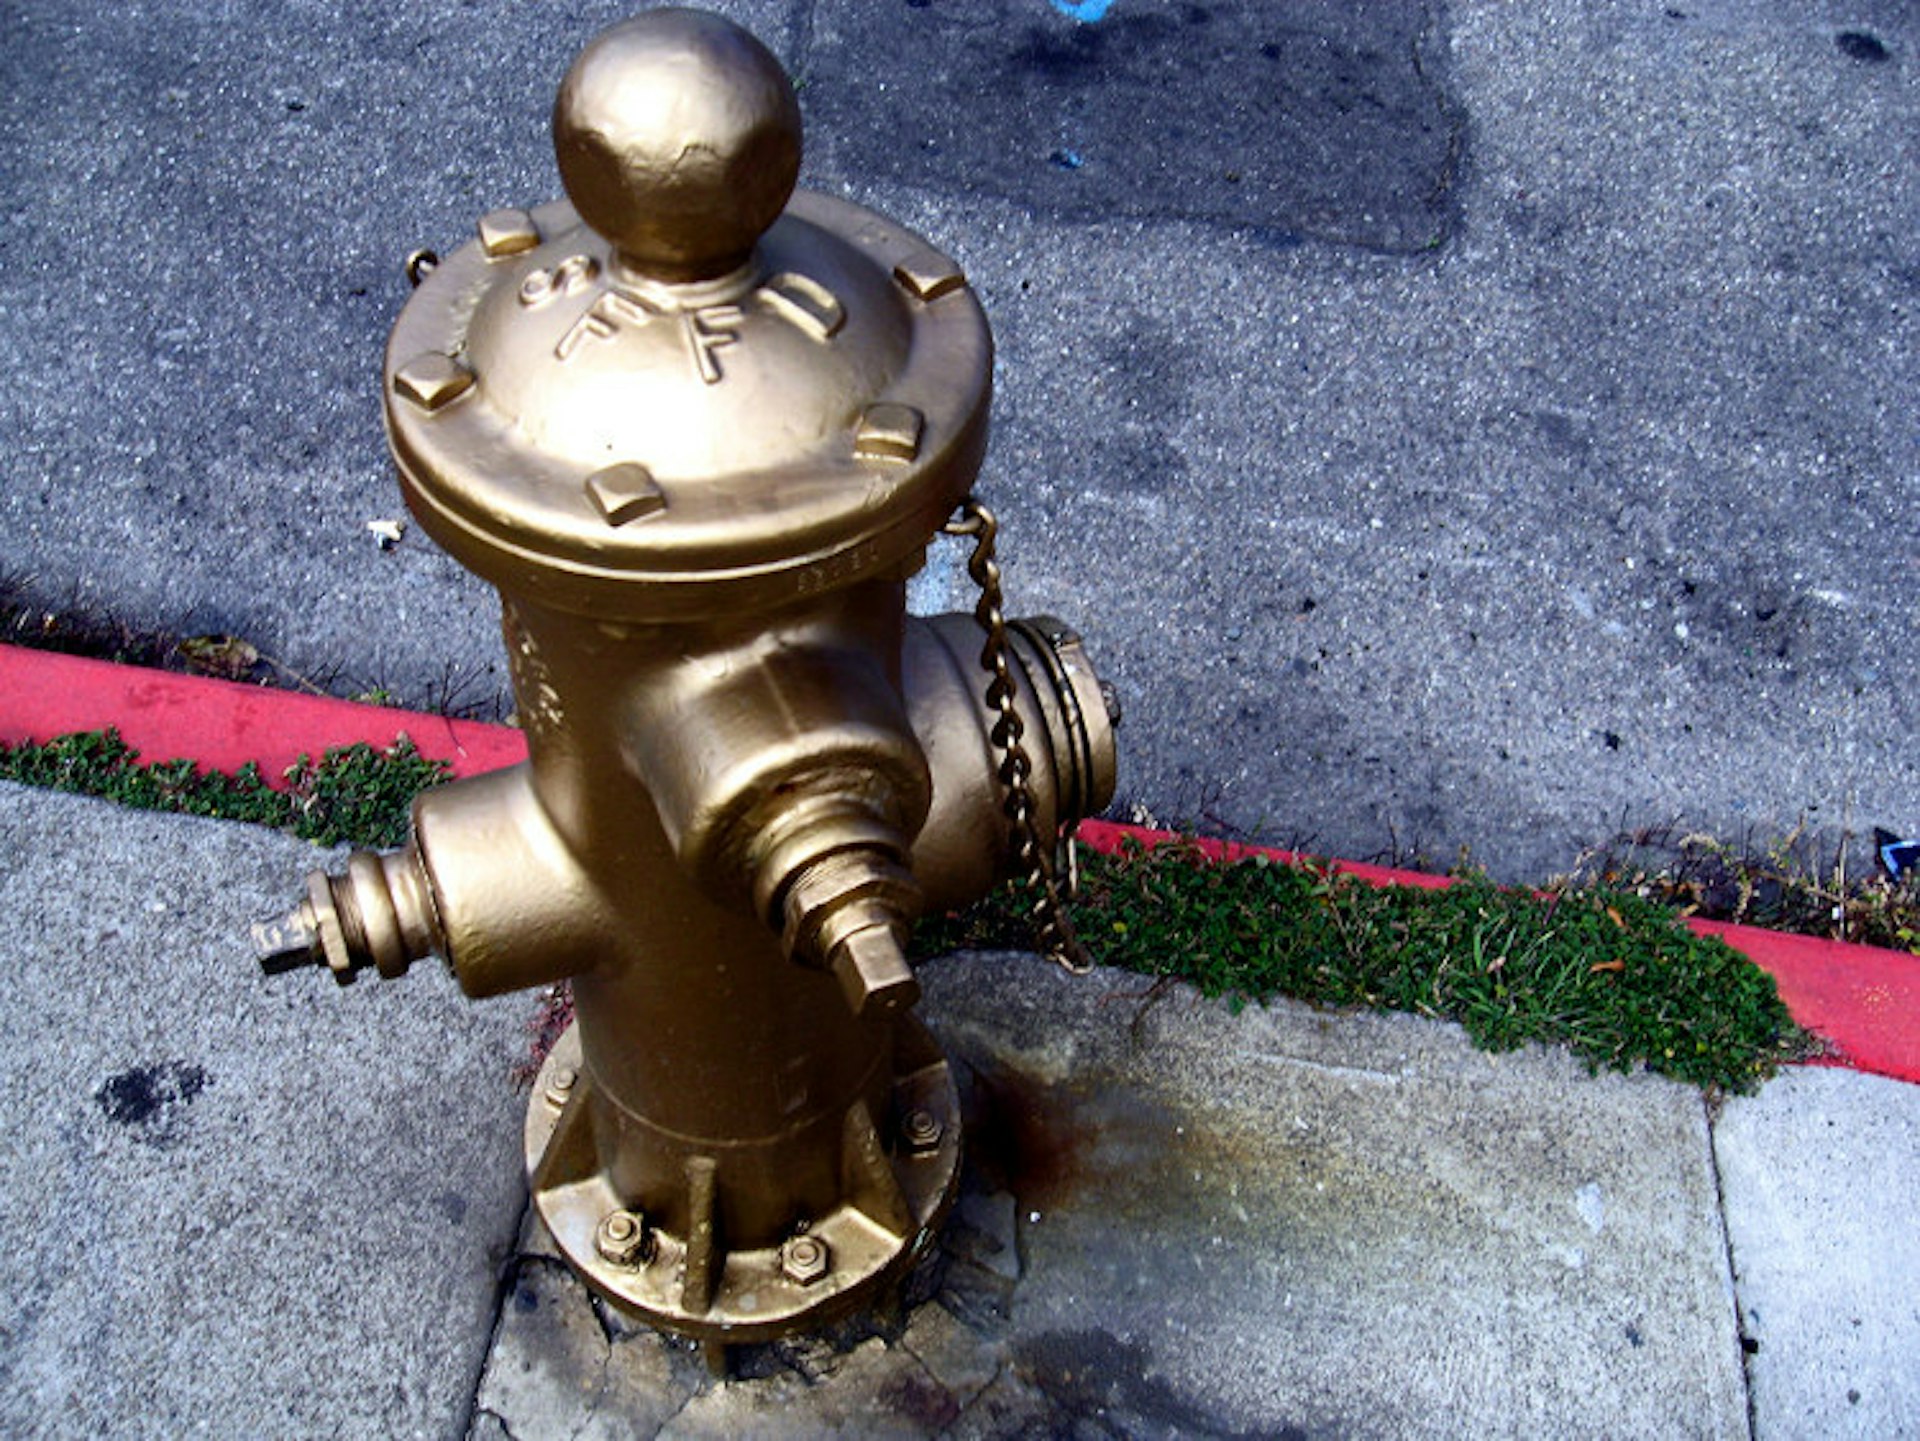 San Francisco's Golden Hydrant is repainted every year on the anniversary of the city's 1906 earthquake and fire. Image by Ryan Gessner / CC BY 2.0